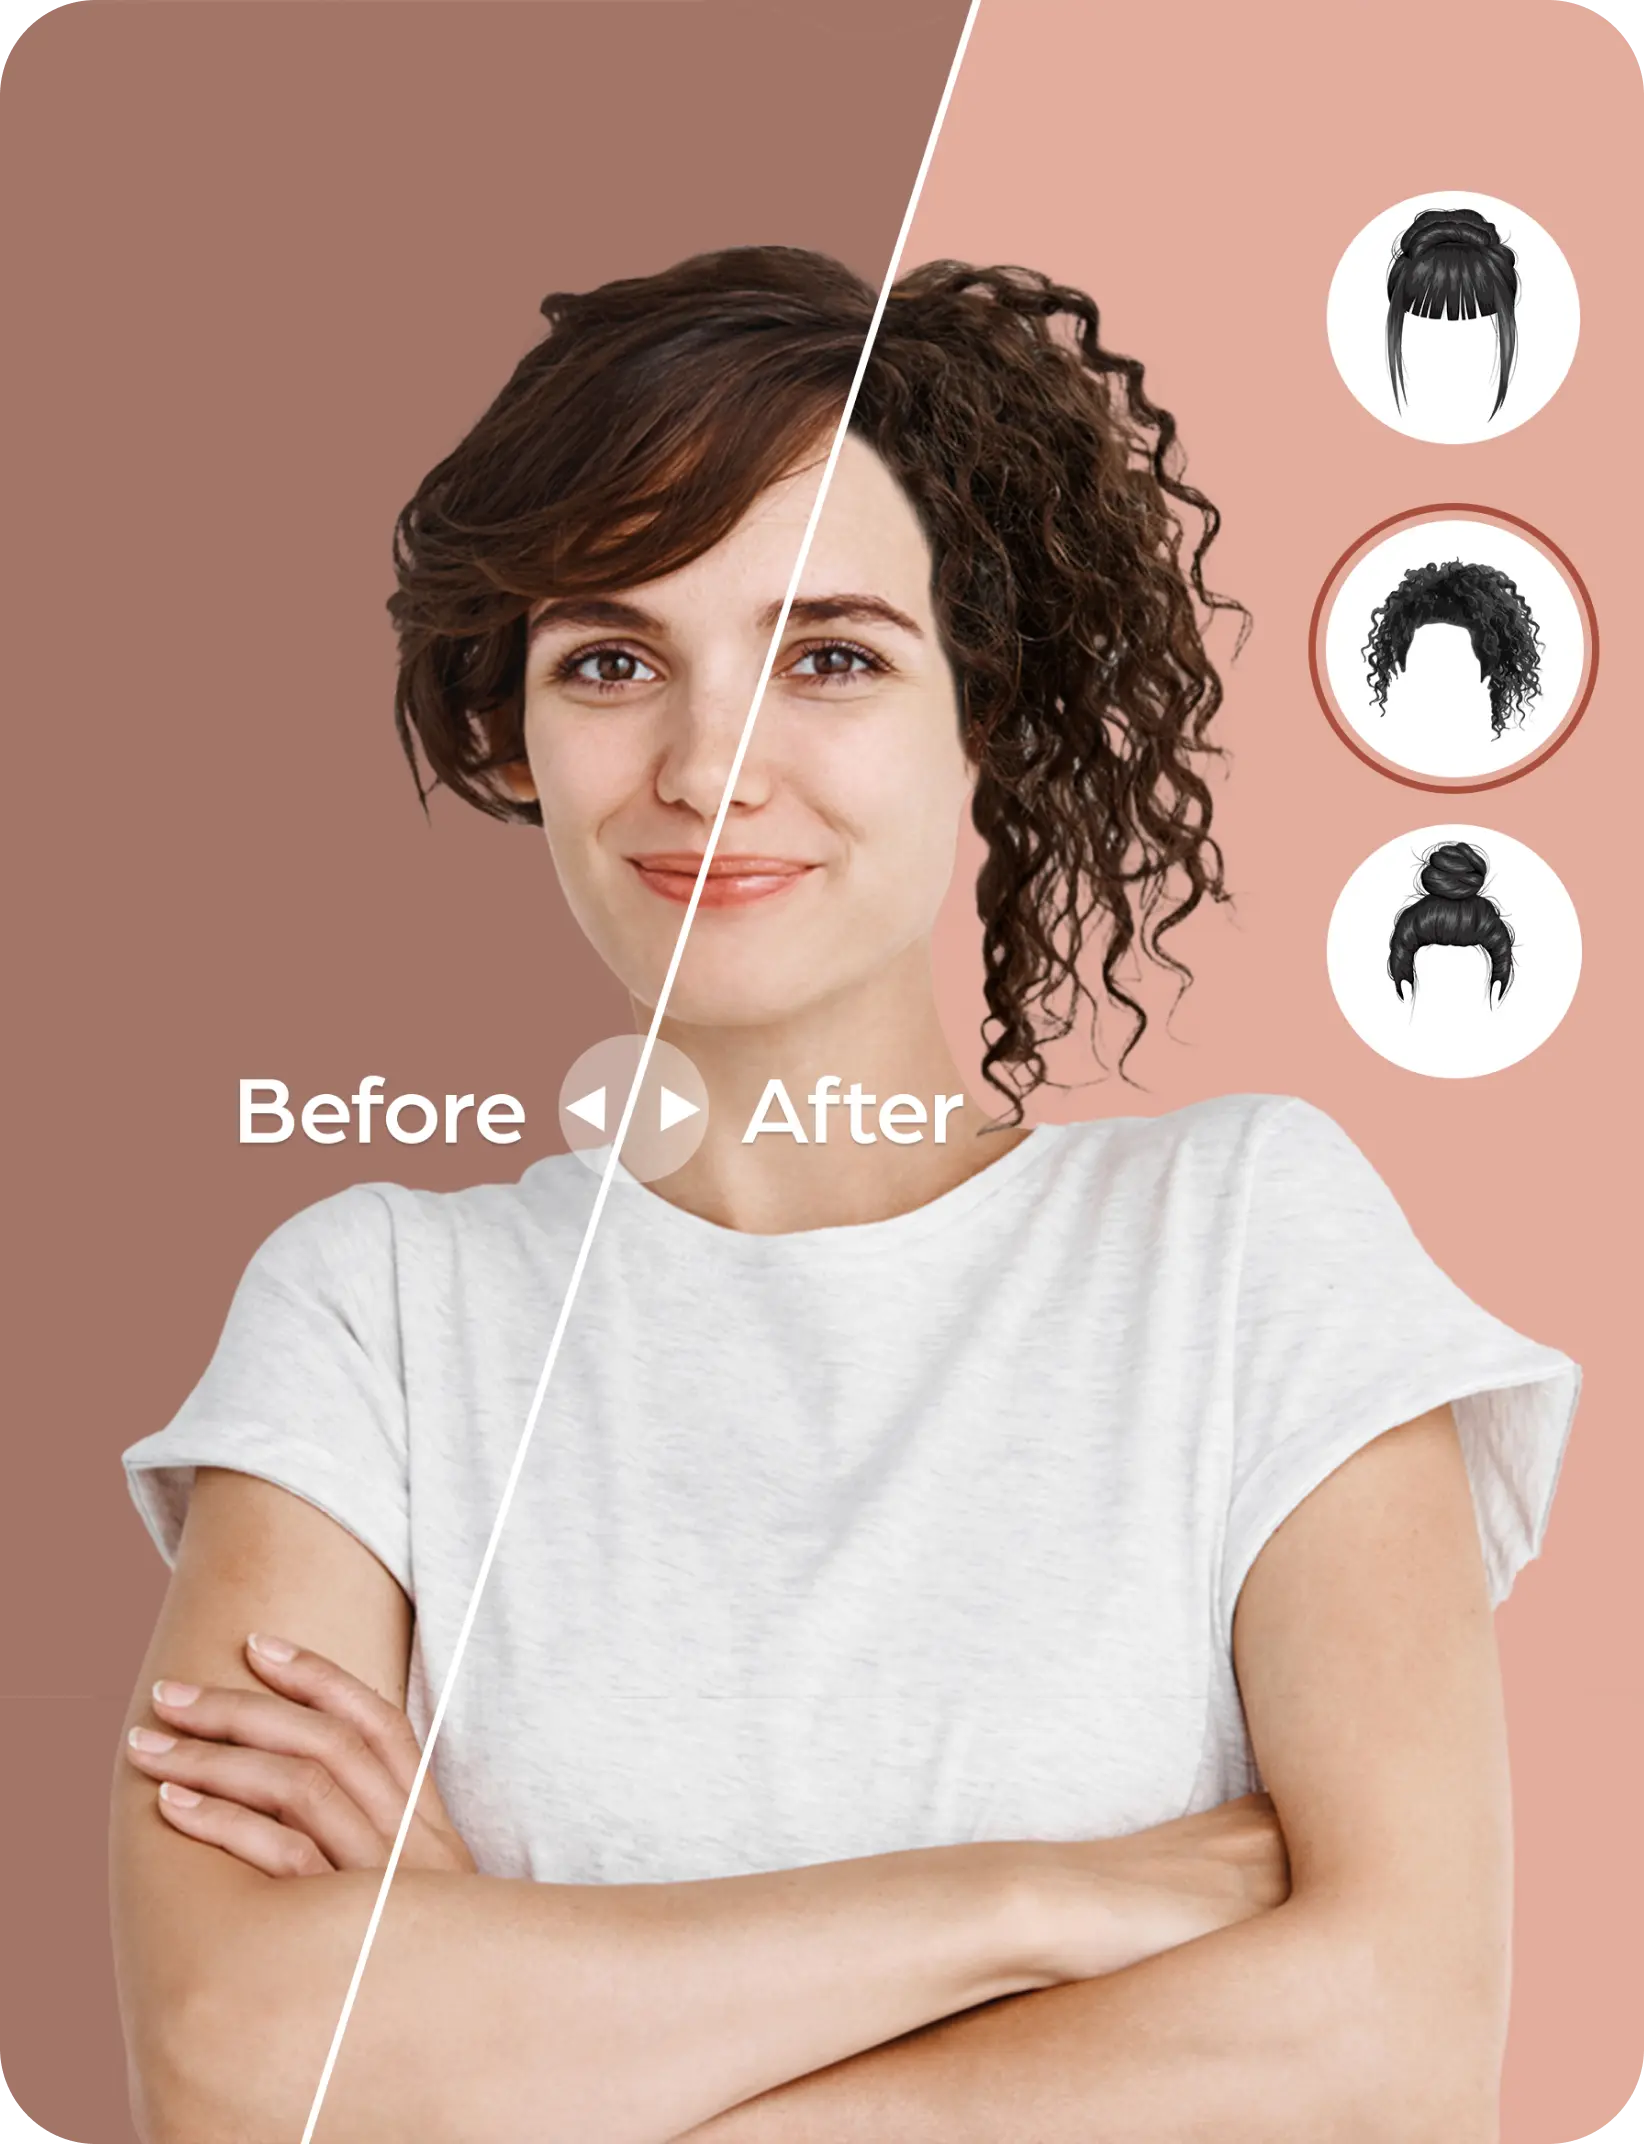 A girl with normal hair trying virtual hairstyle try-on. She has changed her hair to curly